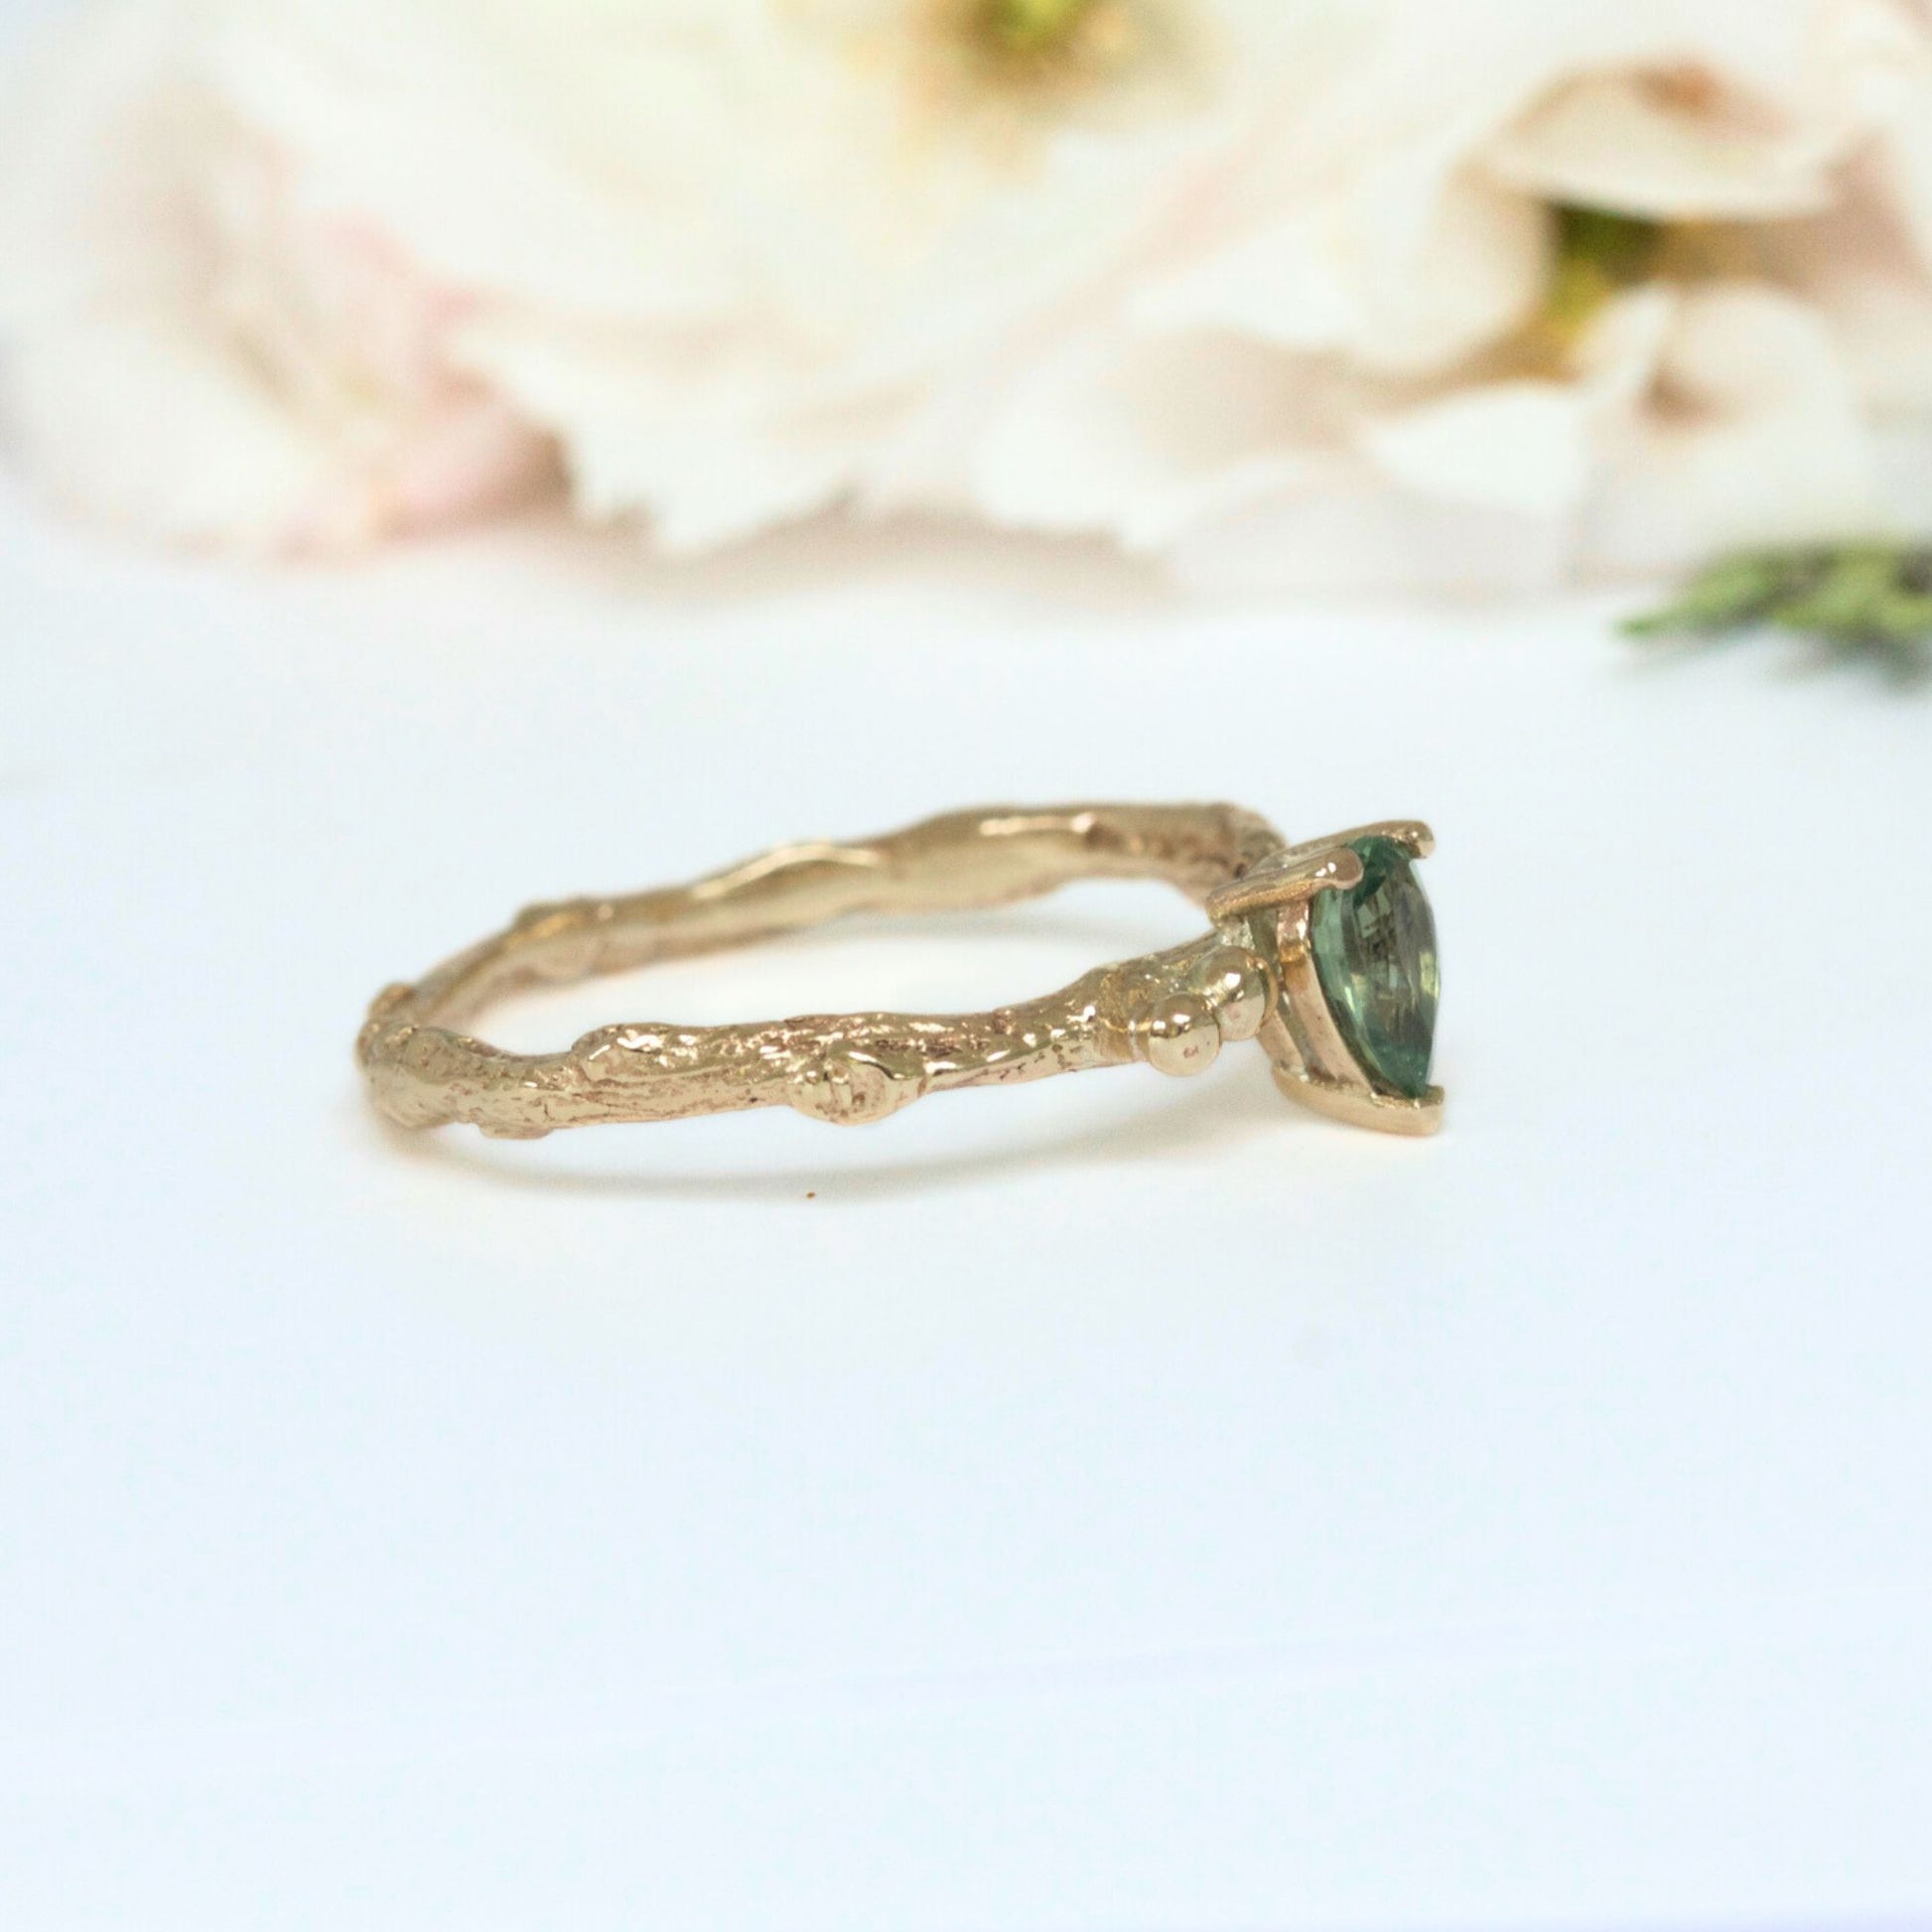 green sapphire engagement ring